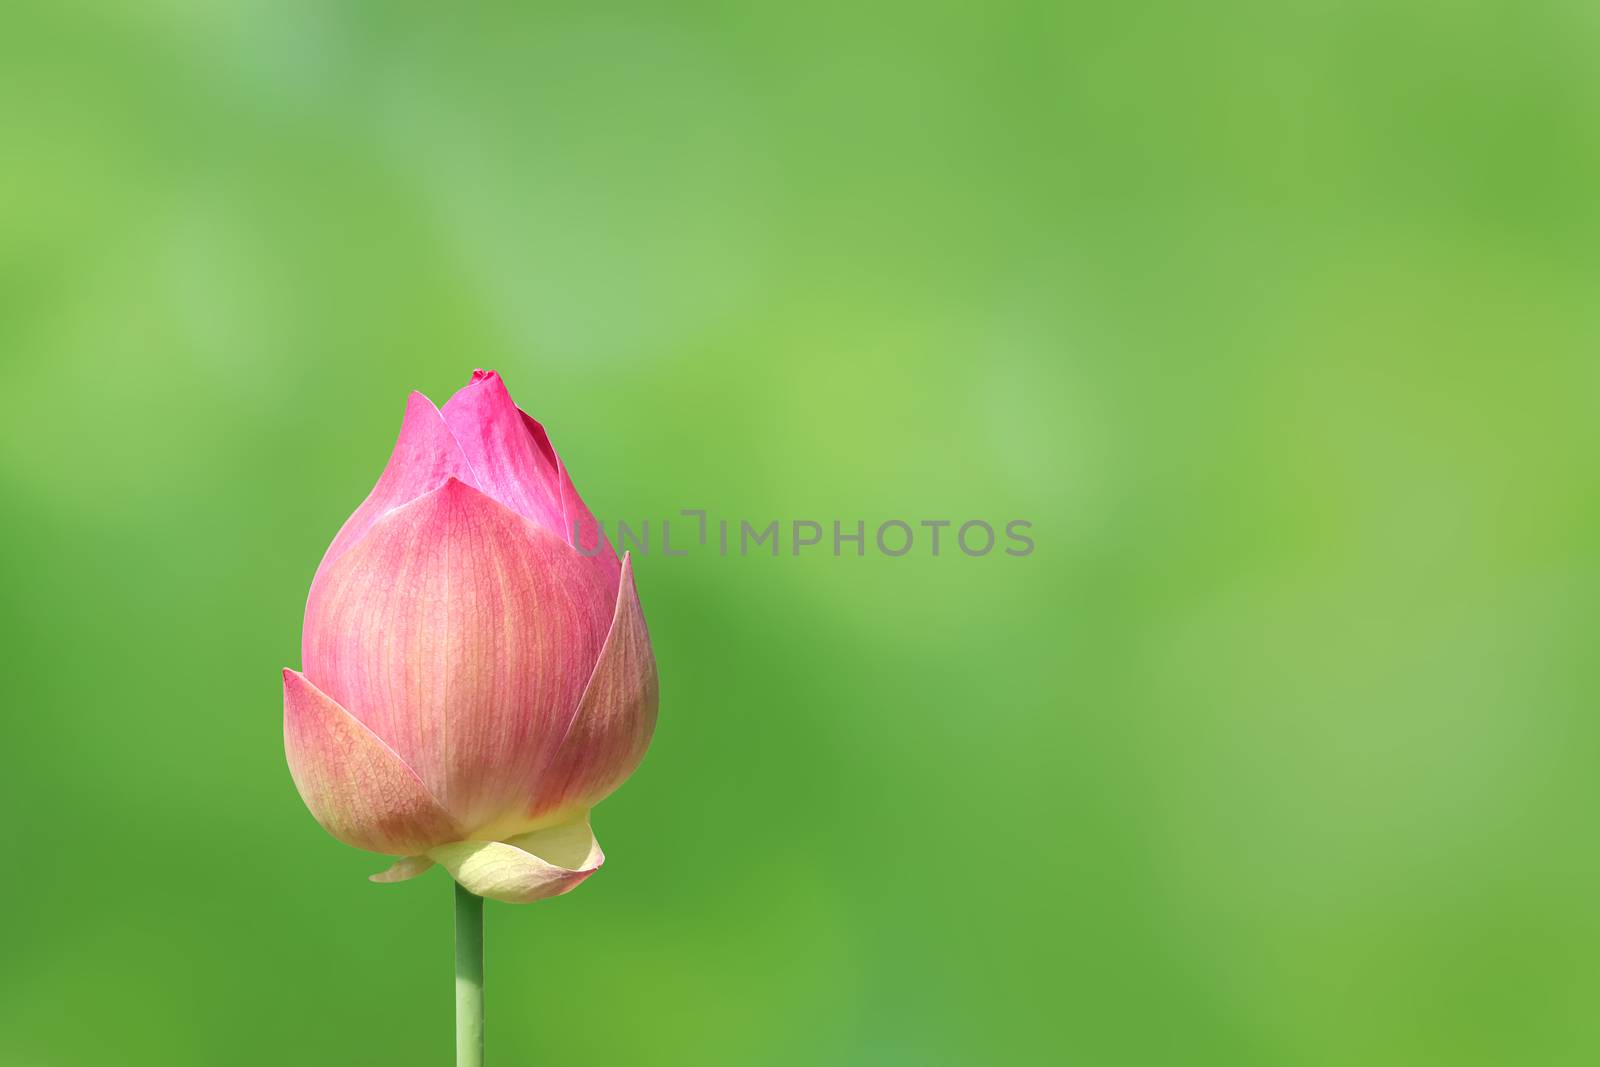 lotus bud on nature green background, lotus pink close-up photos, lotus bud pink flower, beautiful buds pink nature by cgdeaw